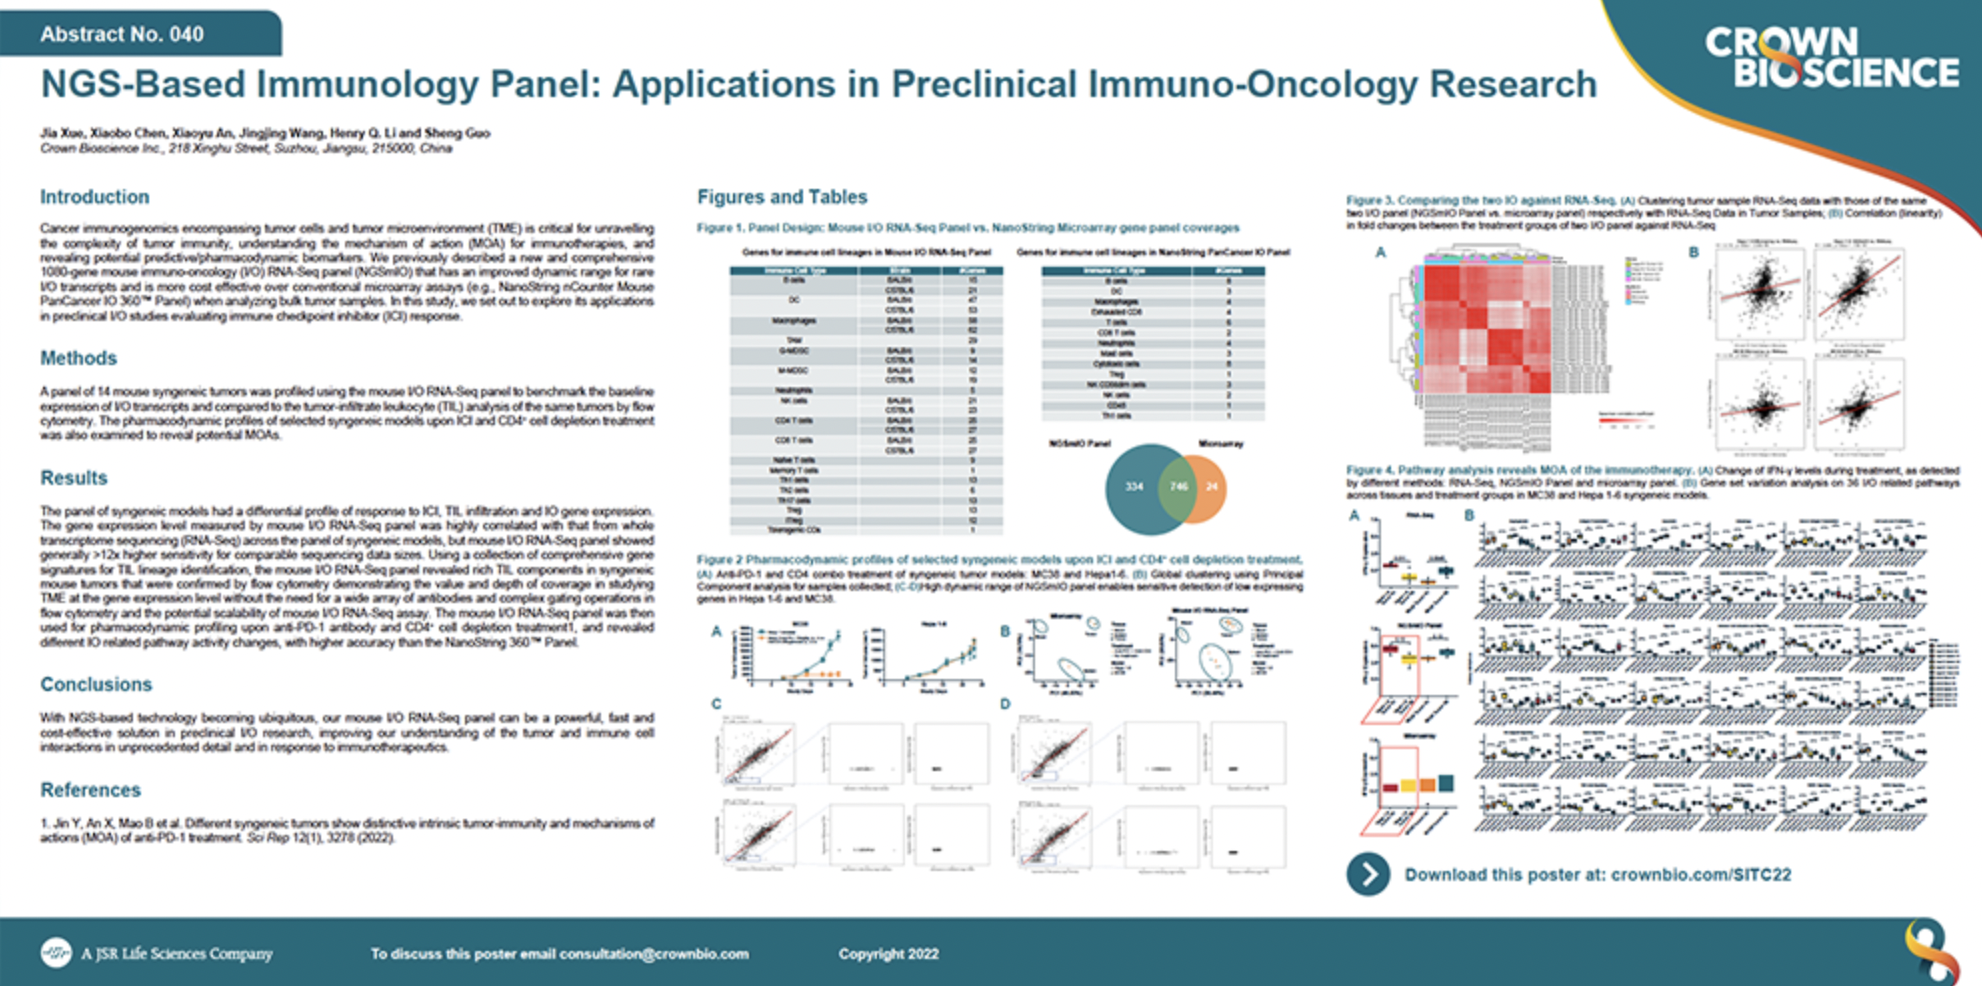 SITC 2022 Poster 040: NGS-Based Immunology Panel: Applications in Preclinical Immuno-Oncology Research